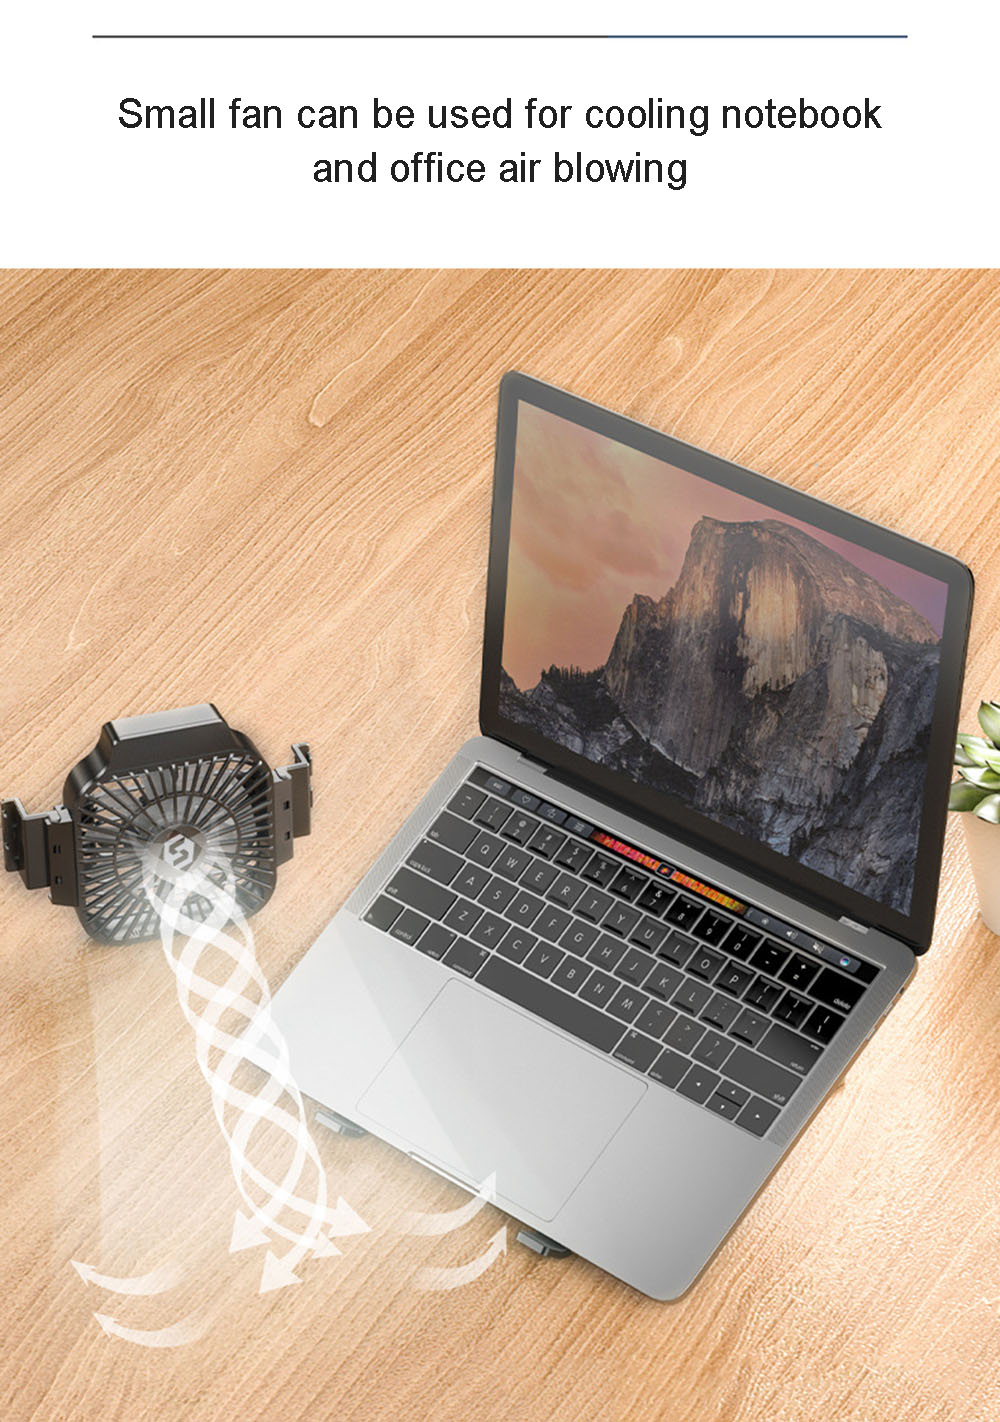 Suohuang-SZJF-054S2-Notebook-Computer-Laptop-Stand-Cooling-Pad-1-Fans-USB-Adjustable-Heightening-She-1724404-3